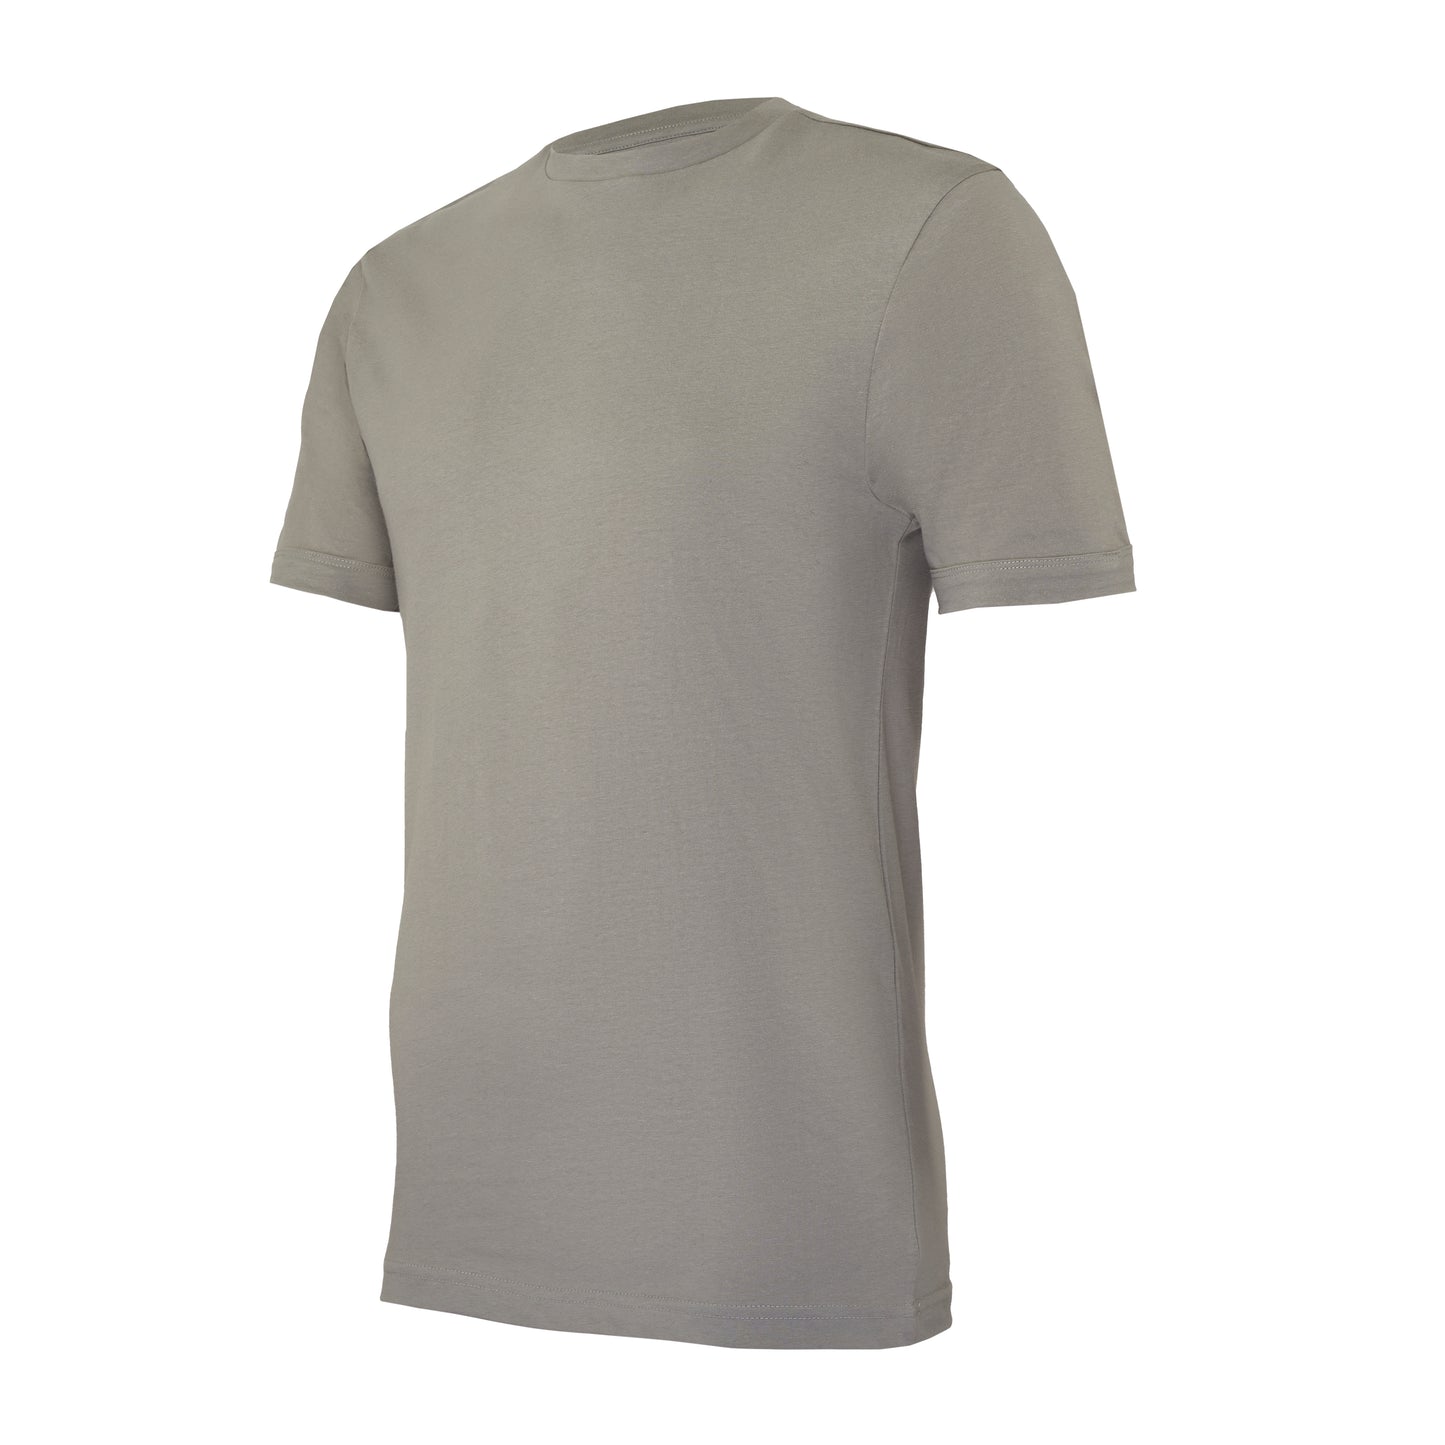 Round tight neck, ash grey, bodyfit T-shirt – pack of 2 or 4 tees